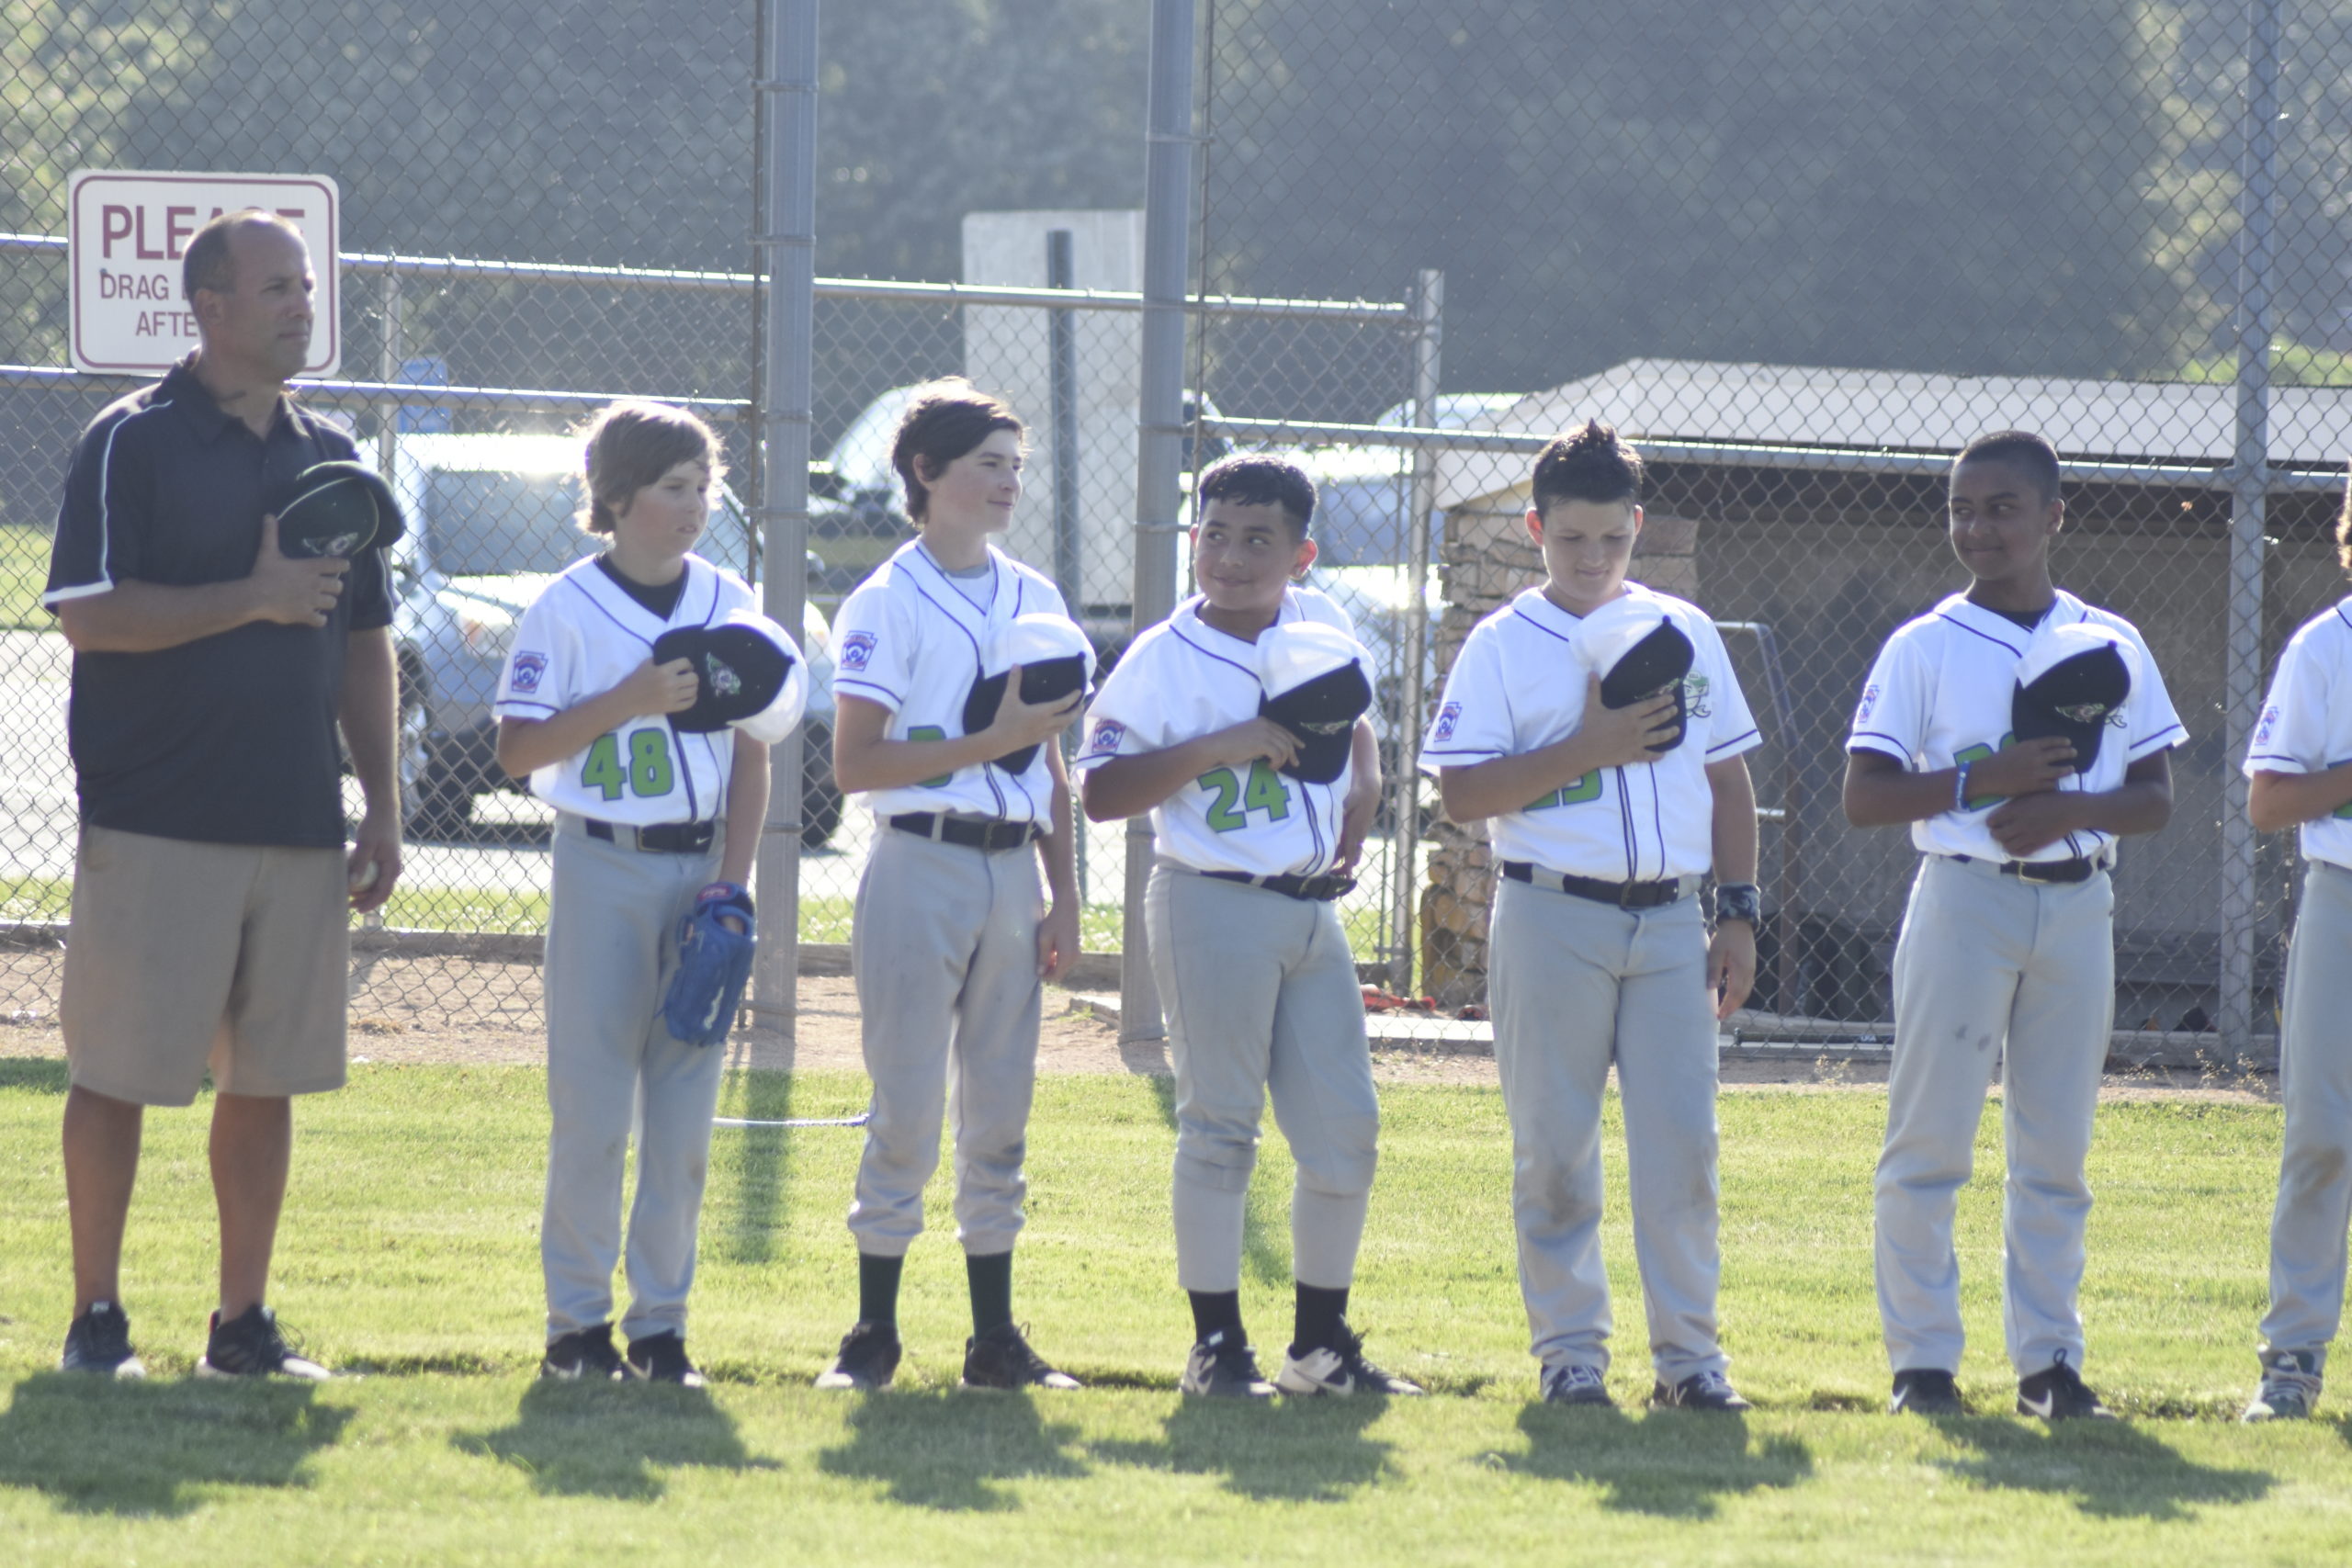 East End Little League 12U All-Stars line up on the third base line for the Star-Spangled Banner prior to their game against Southampton on Wednesday, June 30.